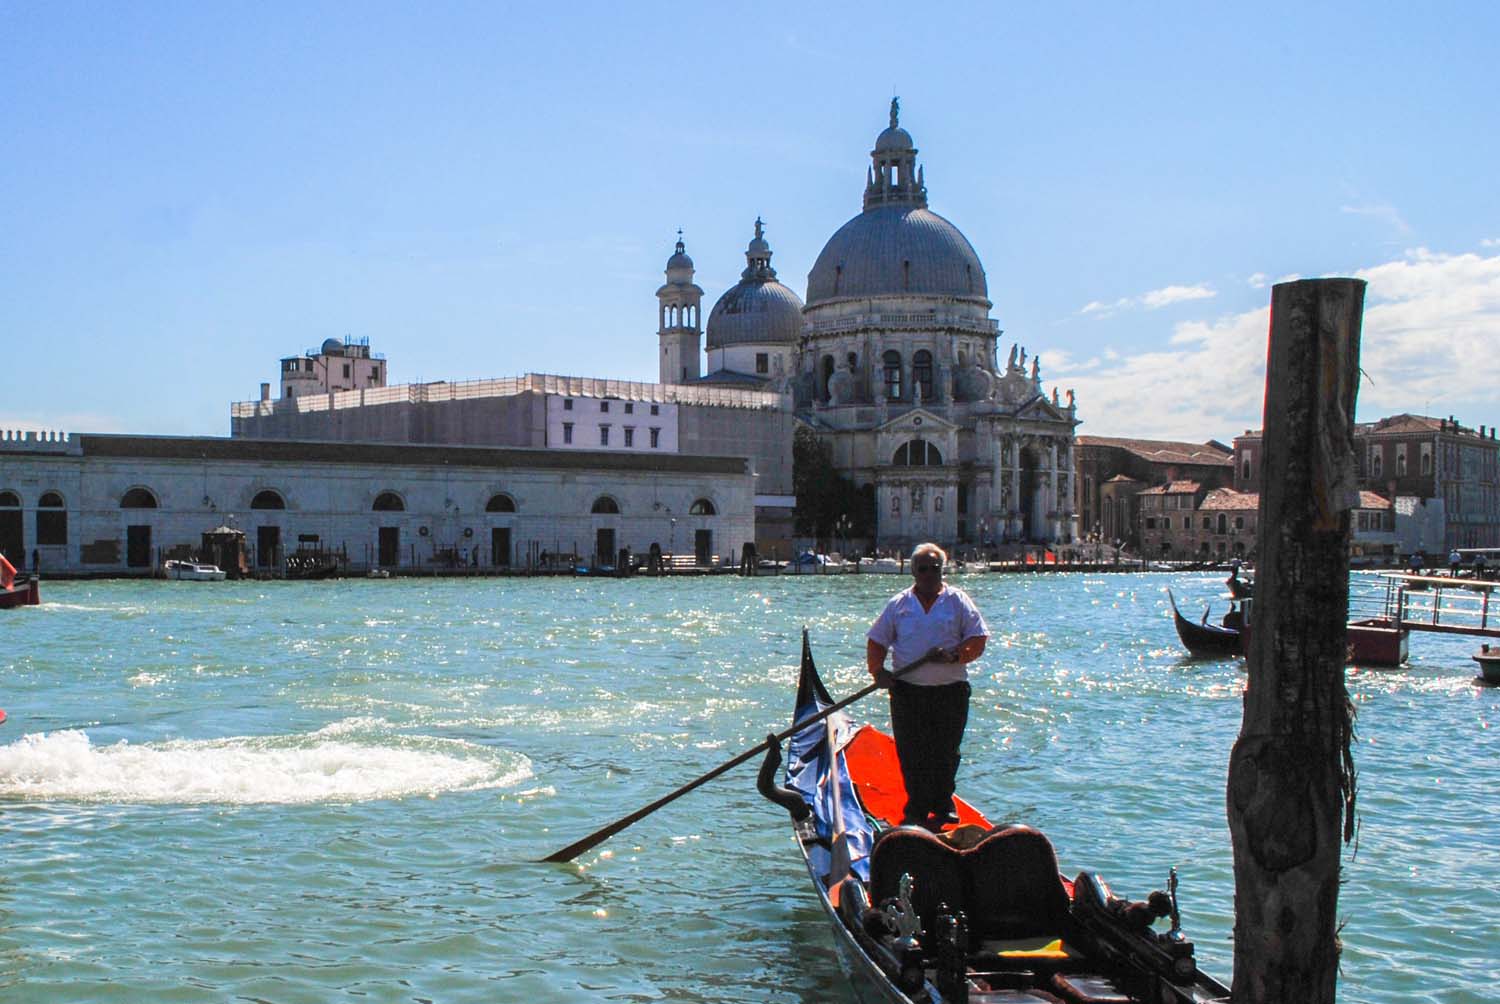 self guided walking tour venice italy